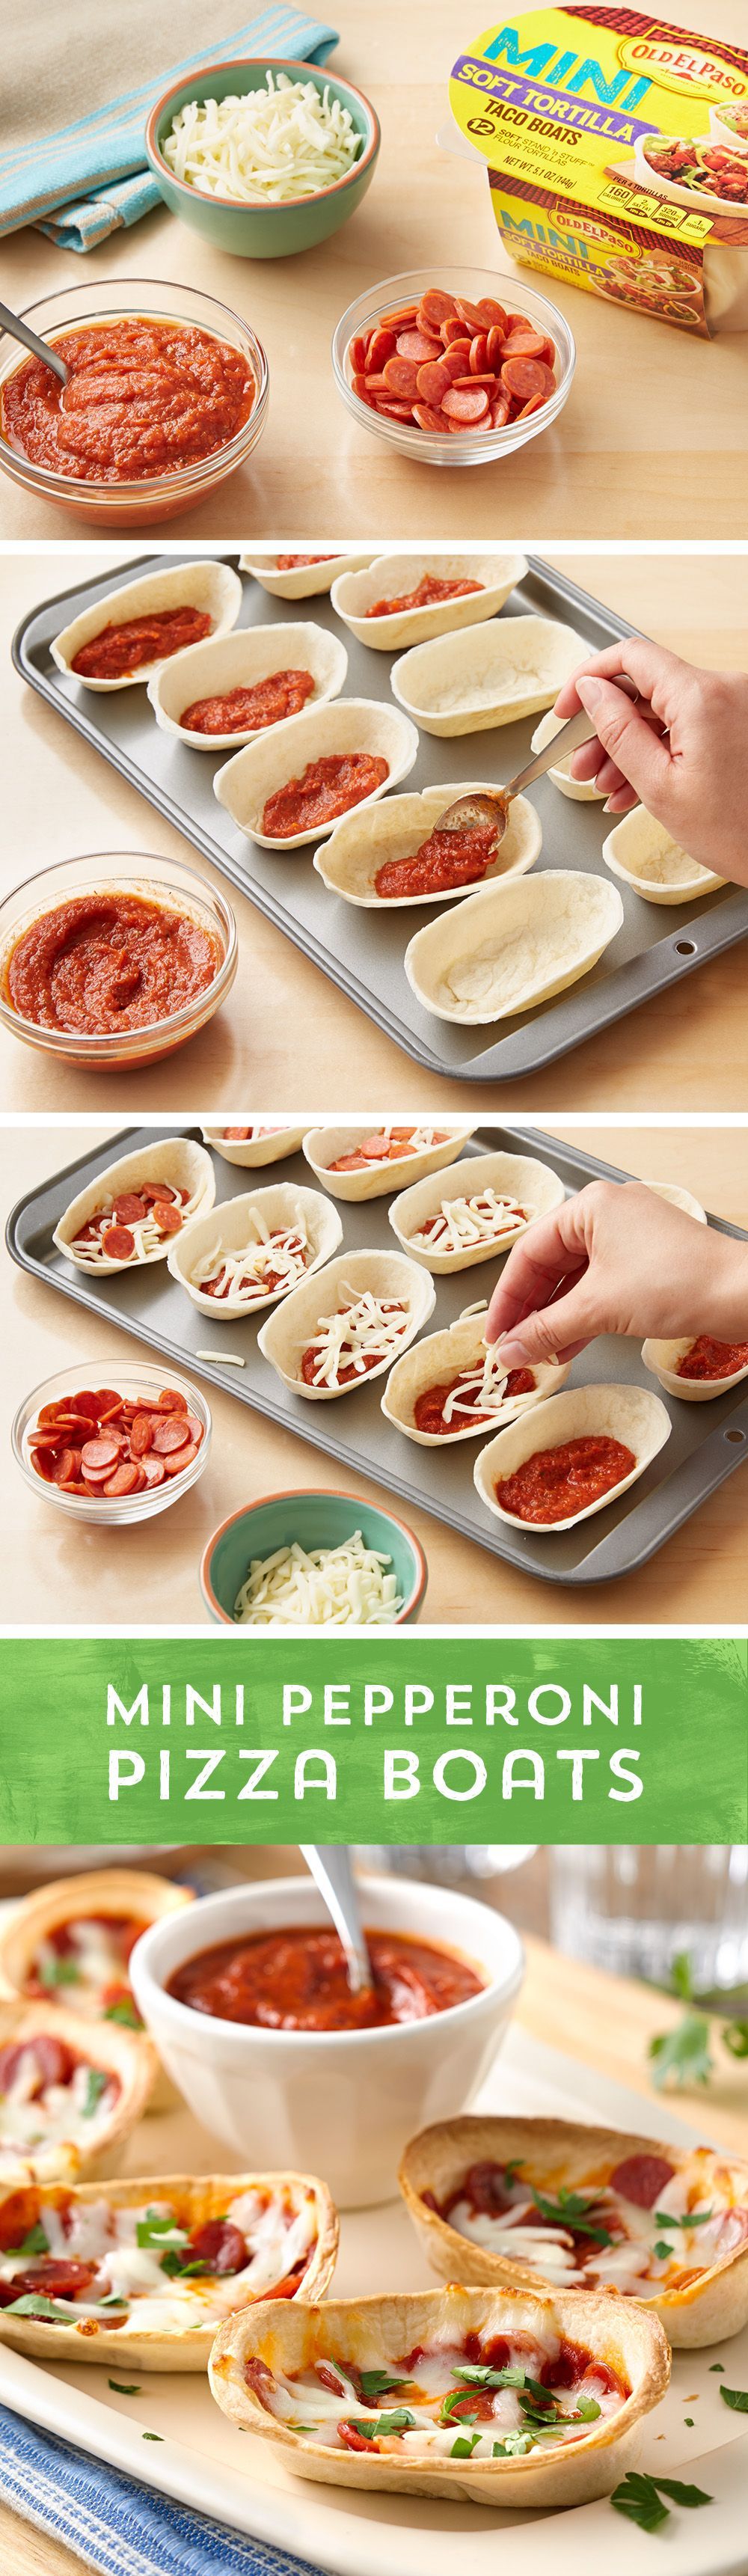 Need a tasty snack or a delicious dish to share? These Mini Pepperoni Pizza boats are sure to make you the snack champion! Theres